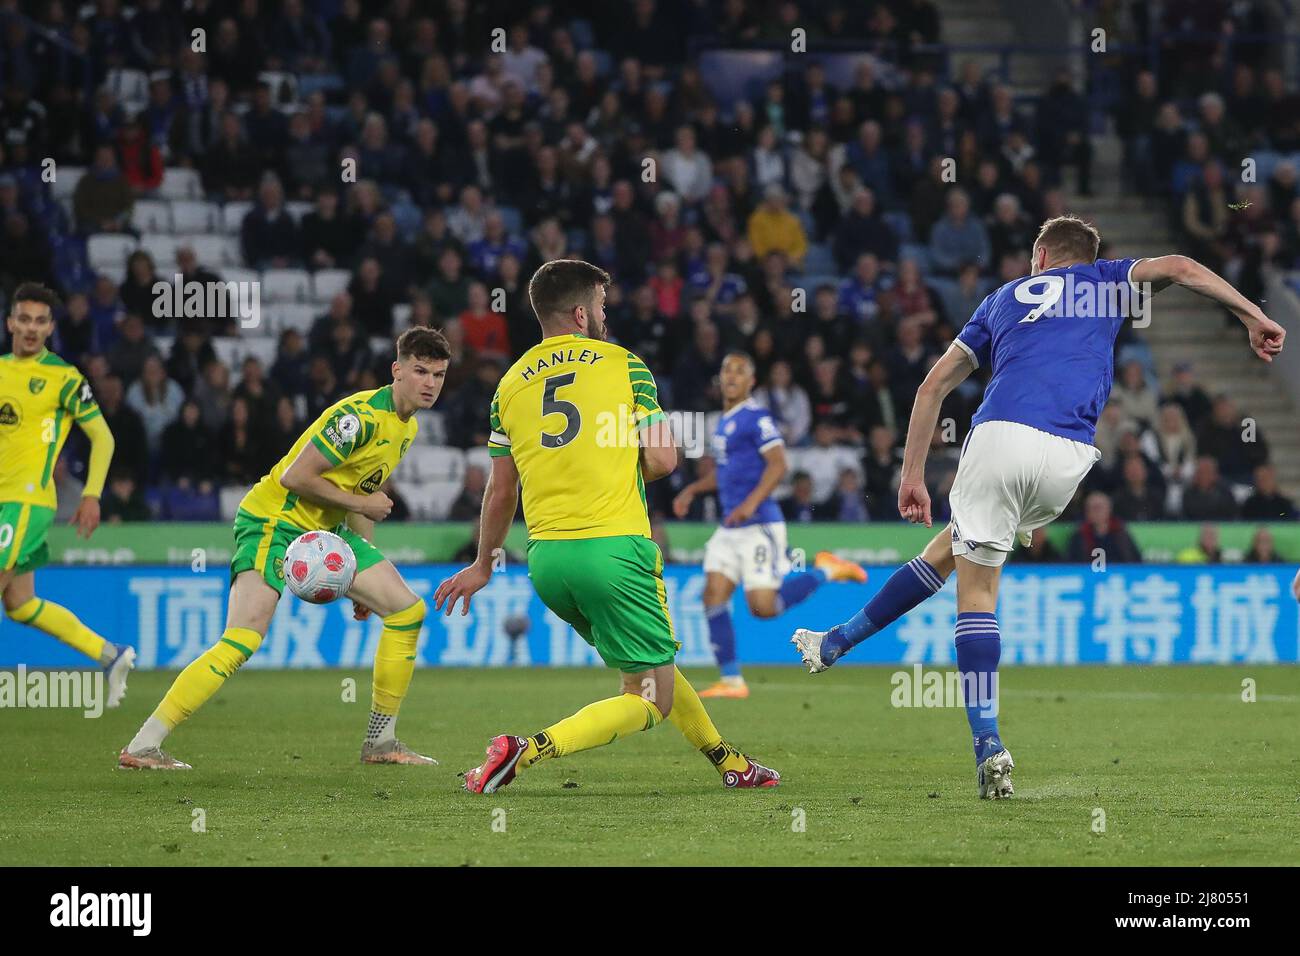 Jamie Vardy #9 of Leicester City takes a shot which deflects off Grant Hanley #5 of Norwich City and goes in to make it 1-0 Stock Photo